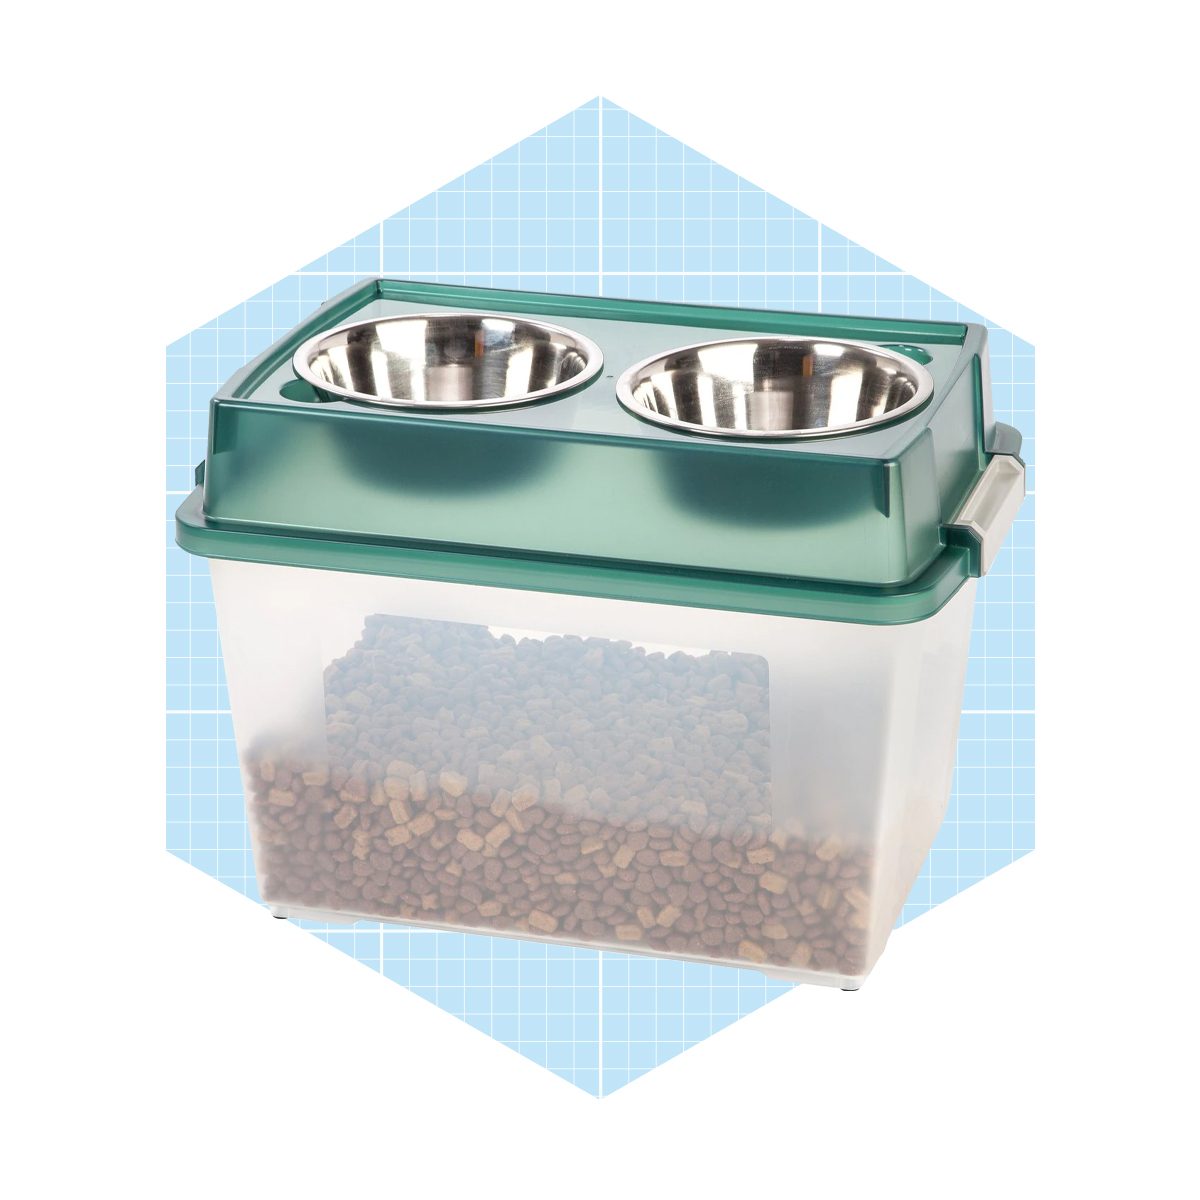 https://www.familyhandyman.com/wp-content/uploads/2021/11/IRIS-Elevated-Dog-Cat-Bowl-with-Airtight-Food-Storage-ecomm-chewy.com_.jpg?fit=700%2C700